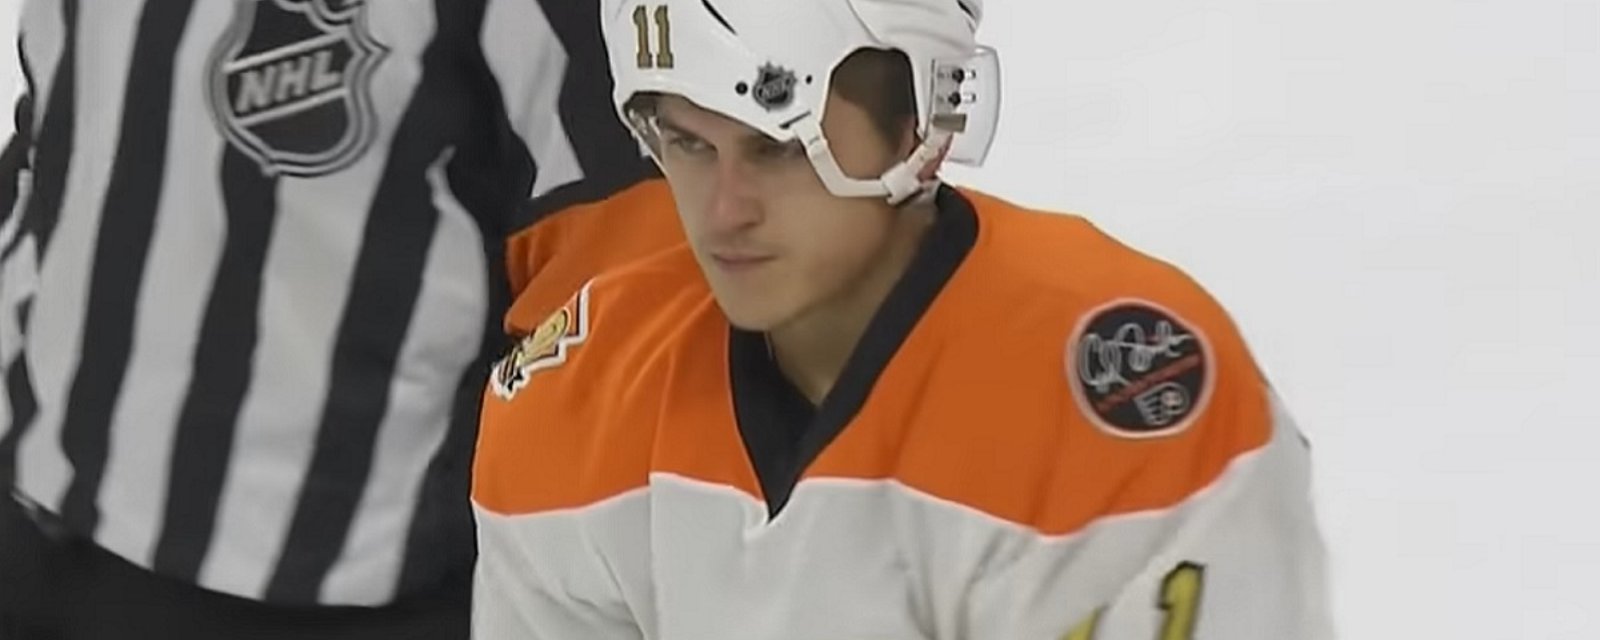 Flyers rookie Konecny drops the gloves with Pirri after questionable hit on teammate.